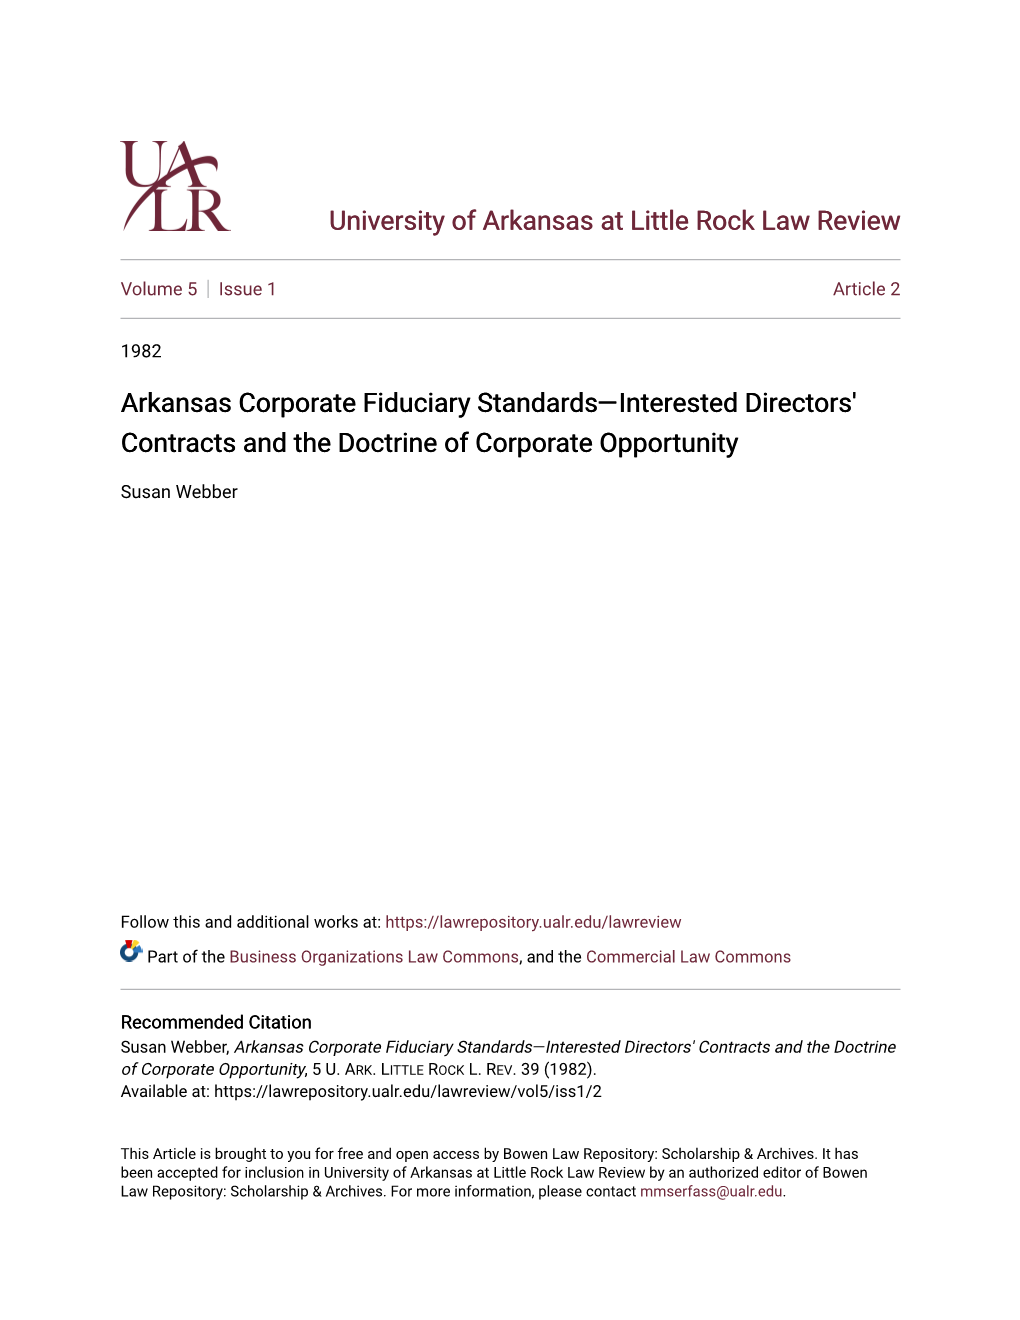 Arkansas Corporate Fiduciary Standards—Interested Directors' Contracts and the Doctrine of Corporate Opportunity